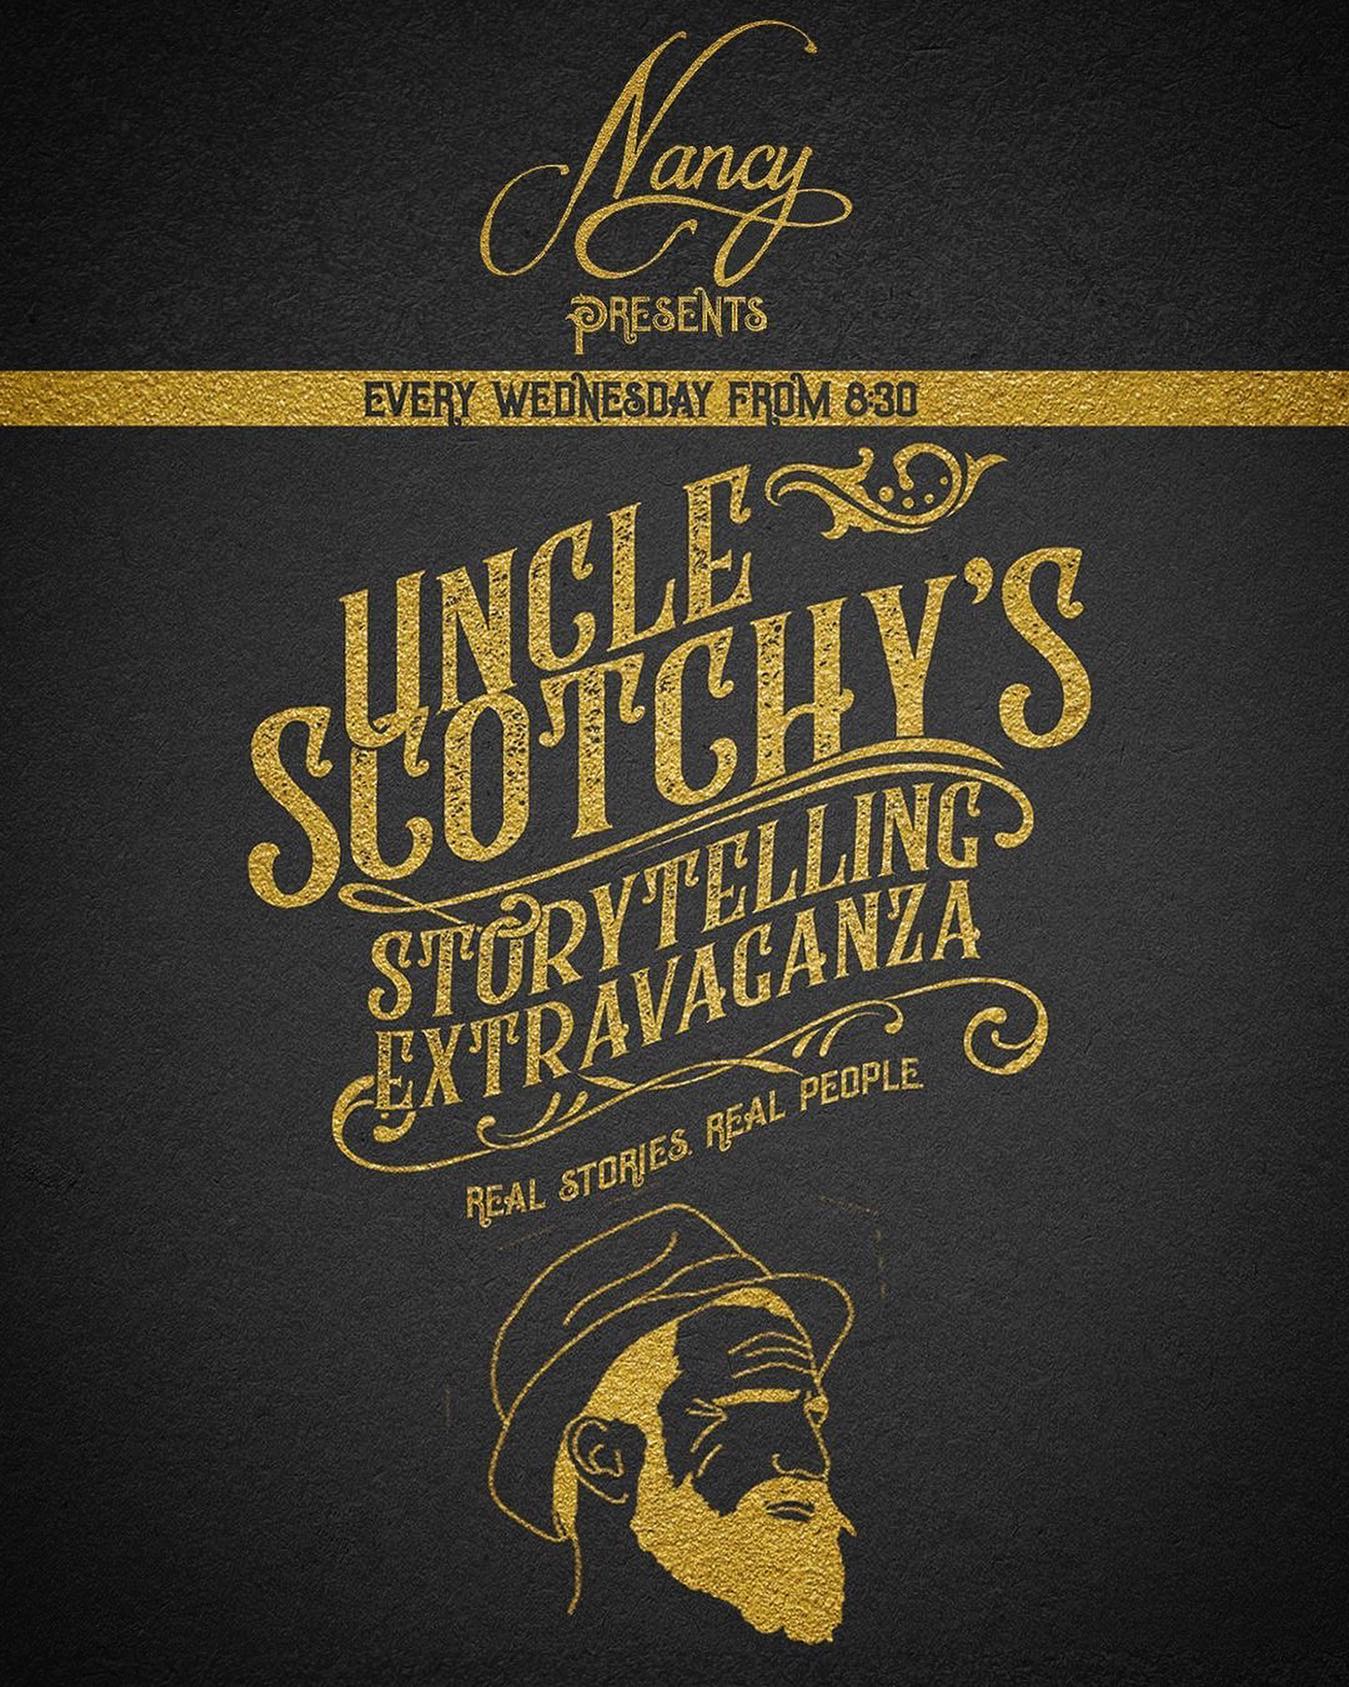 Uncle Scotchy’s Storytelling at Bar Nancy - Every Wednesday at 8pm